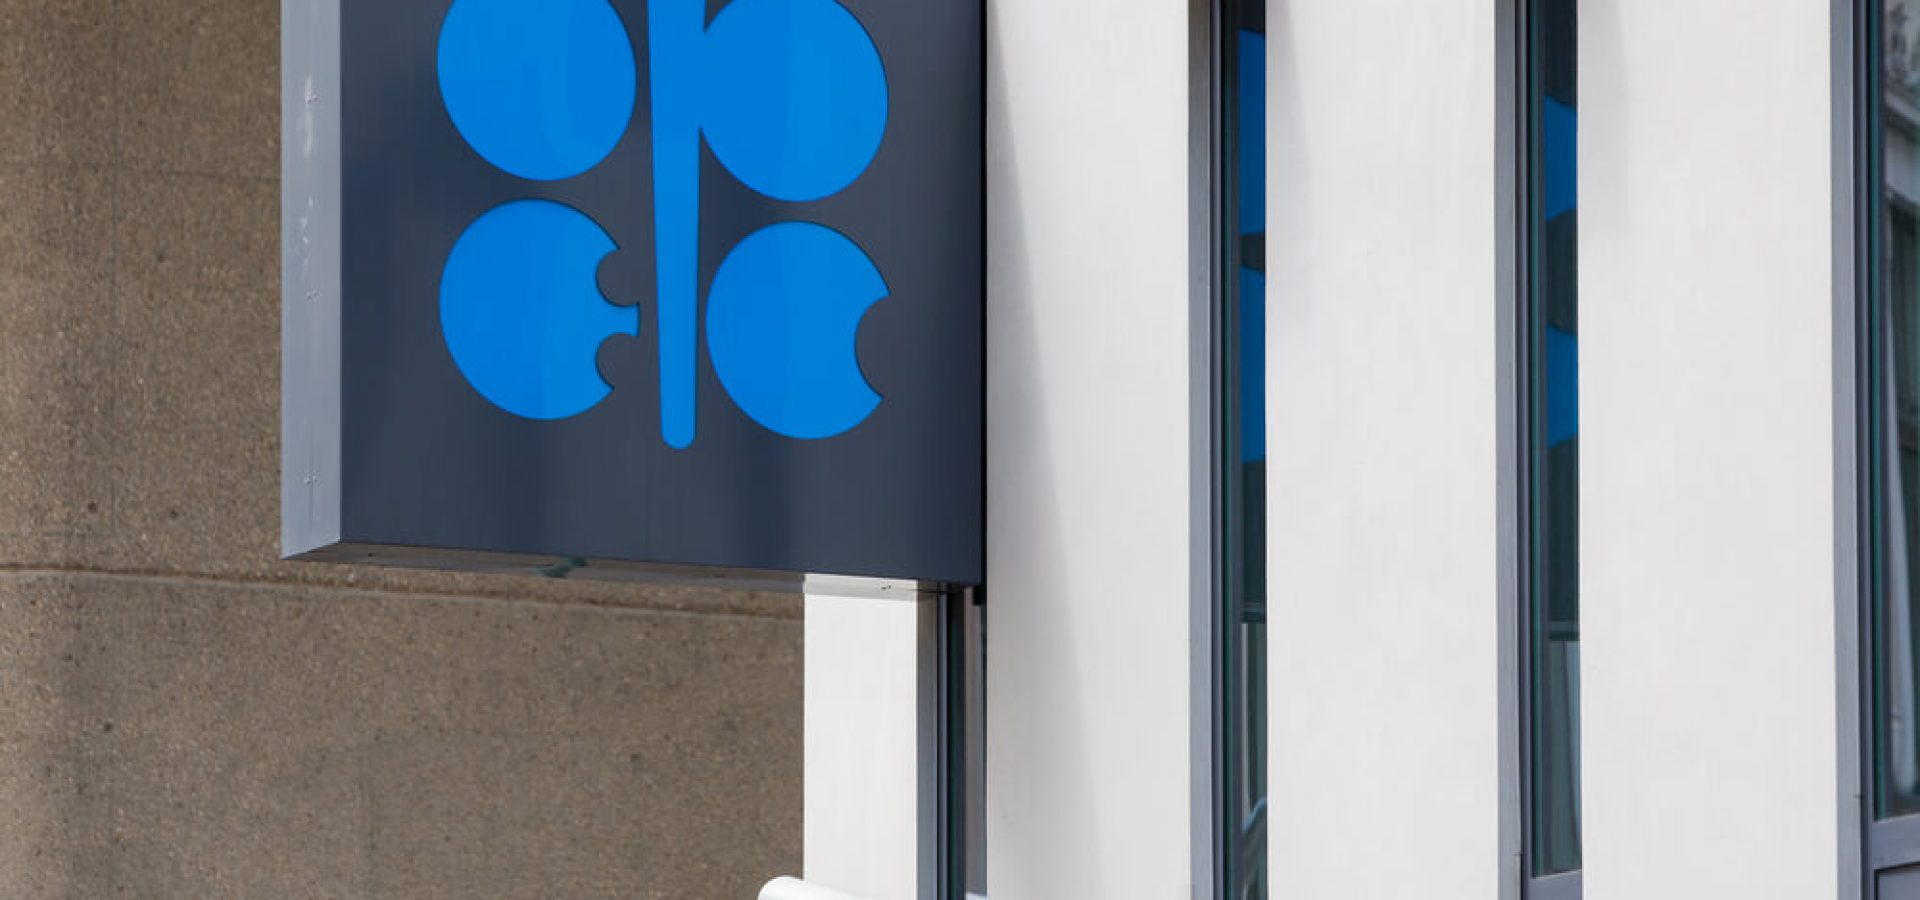 OPEC: Building Organization of the Petroleum Exporting Countries with OPEC logo.